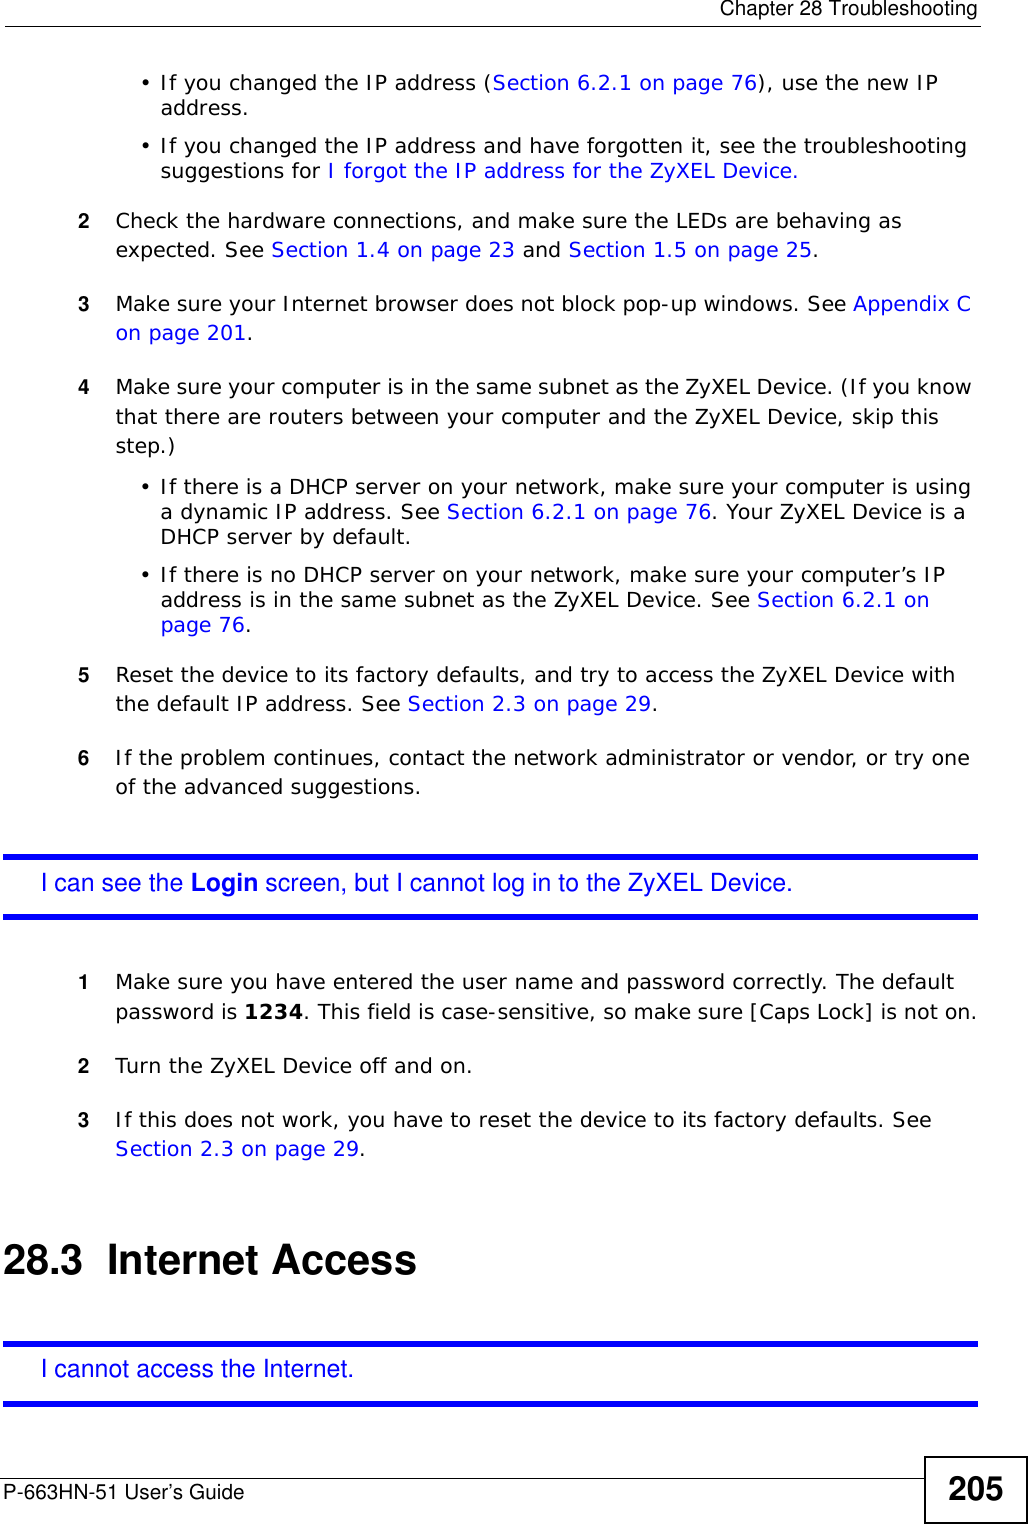  Chapter 28 TroubleshootingP-663HN-51 User’s Guide 205• If you changed the IP address (Section 6.2.1 on page 76), use the new IP address.• If you changed the IP address and have forgotten it, see the troubleshooting suggestions for I forgot the IP address for the ZyXEL Device.2Check the hardware connections, and make sure the LEDs are behaving as expected. See Section 1.4 on page 23 and Section 1.5 on page 25. 3Make sure your Internet browser does not block pop-up windows. See Appendix C on page 201.4Make sure your computer is in the same subnet as the ZyXEL Device. (If you know that there are routers between your computer and the ZyXEL Device, skip this step.)• If there is a DHCP server on your network, make sure your computer is using a dynamic IP address. See Section 6.2.1 on page 76. Your ZyXEL Device is a DHCP server by default.• If there is no DHCP server on your network, make sure your computer’s IP address is in the same subnet as the ZyXEL Device. See Section 6.2.1 on page 76.5Reset the device to its factory defaults, and try to access the ZyXEL Device with the default IP address. See Section 2.3 on page 29.6If the problem continues, contact the network administrator or vendor, or try one of the advanced suggestions.I can see the Login screen, but I cannot log in to the ZyXEL Device.1Make sure you have entered the user name and password correctly. The default password is 1234. This field is case-sensitive, so make sure [Caps Lock] is not on.2Turn the ZyXEL Device off and on. 3If this does not work, you have to reset the device to its factory defaults. See Section 2.3 on page 29.28.3  Internet AccessI cannot access the Internet.